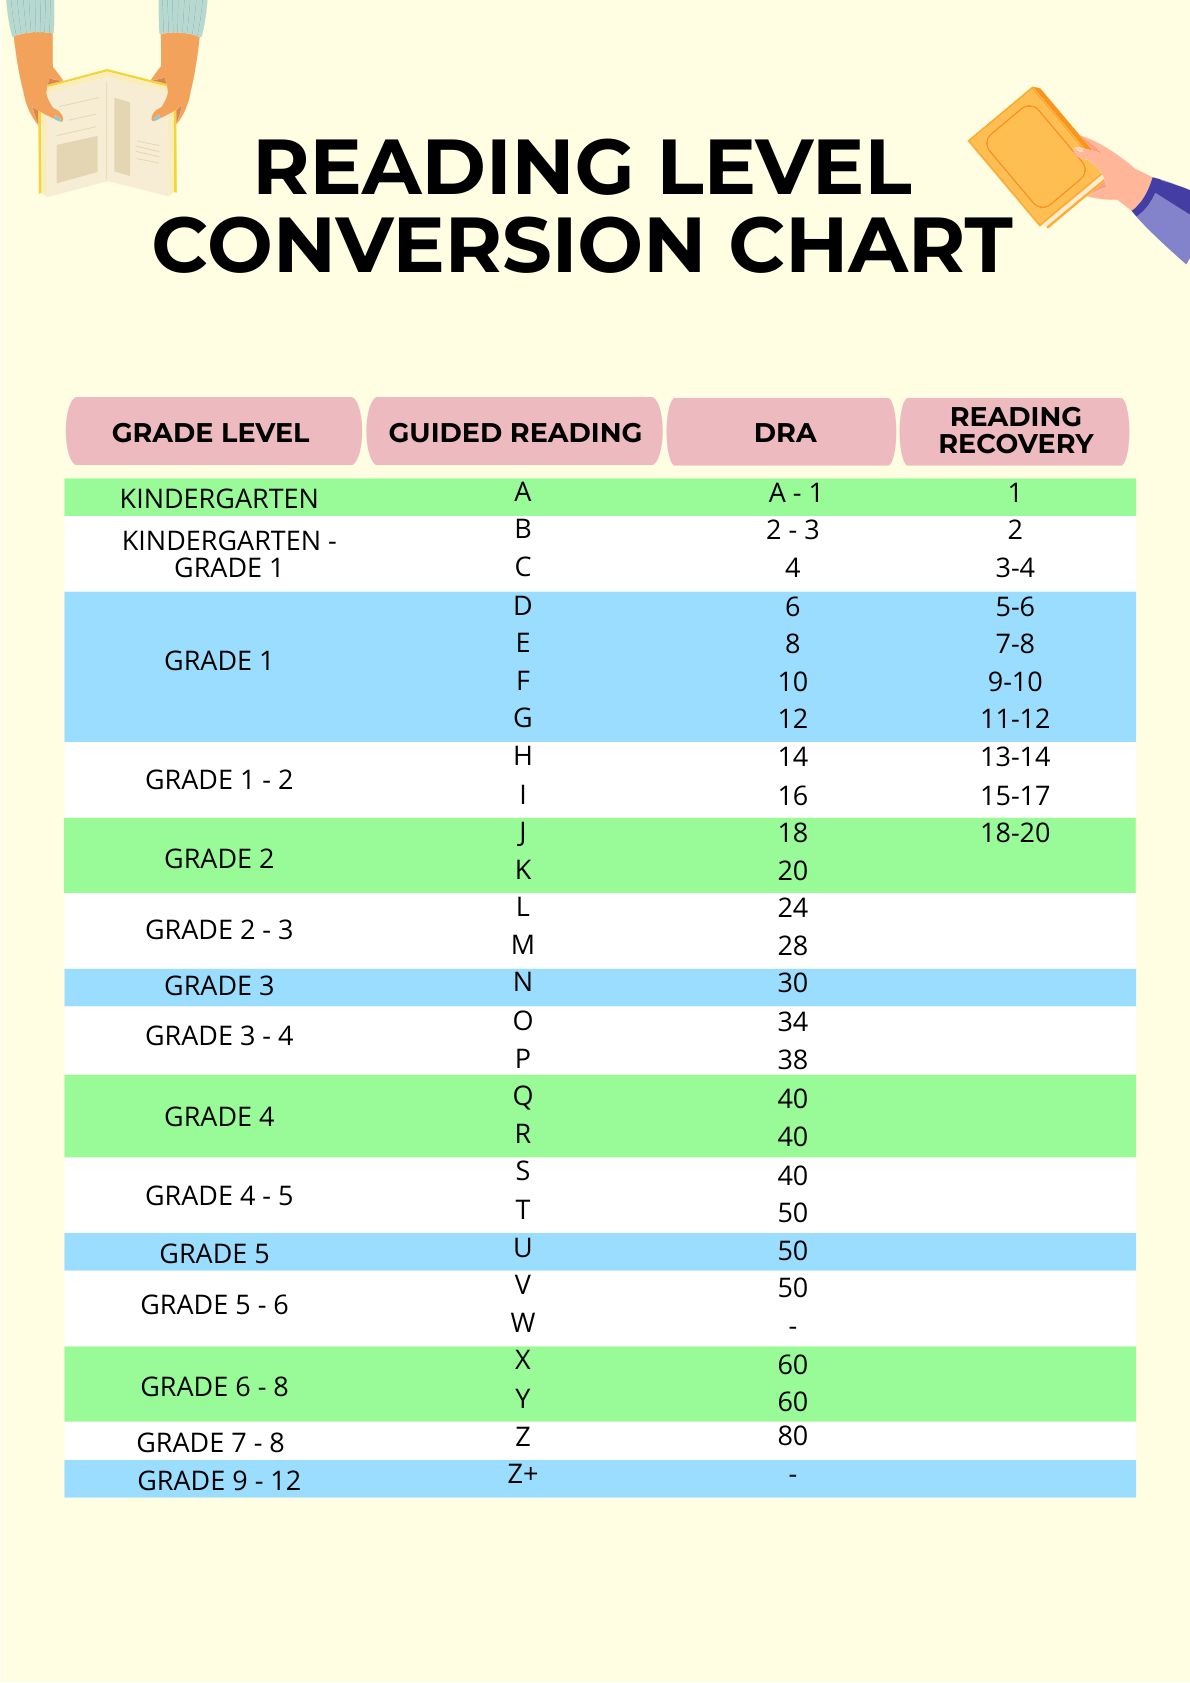 Reading Level Conversion Chart Action Potential